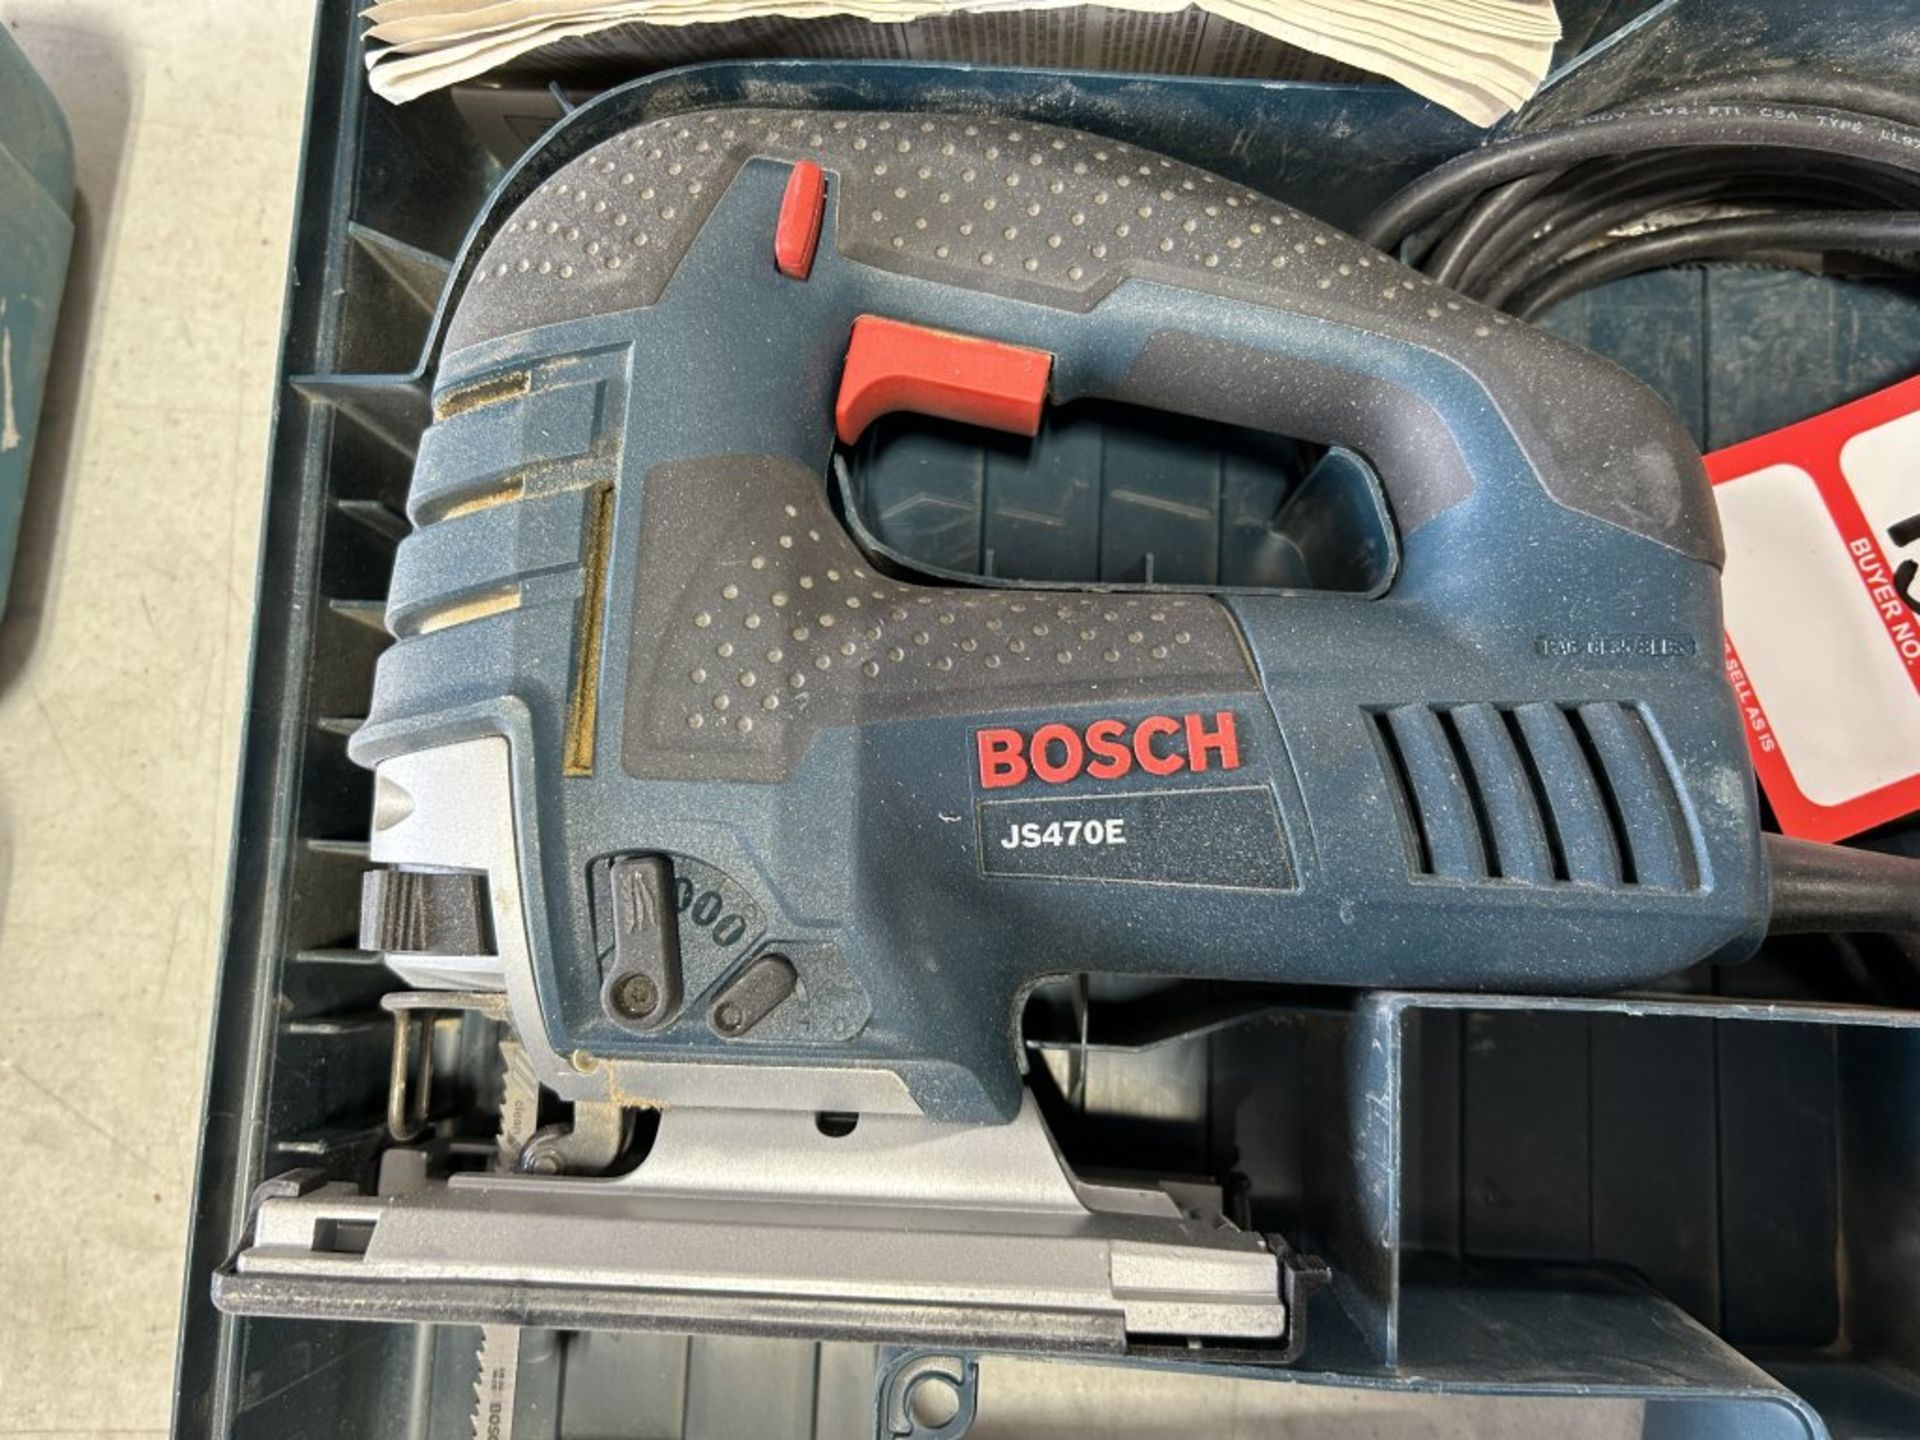 BOSCH JS470E JIGSAW WITH CASE - Image 2 of 4